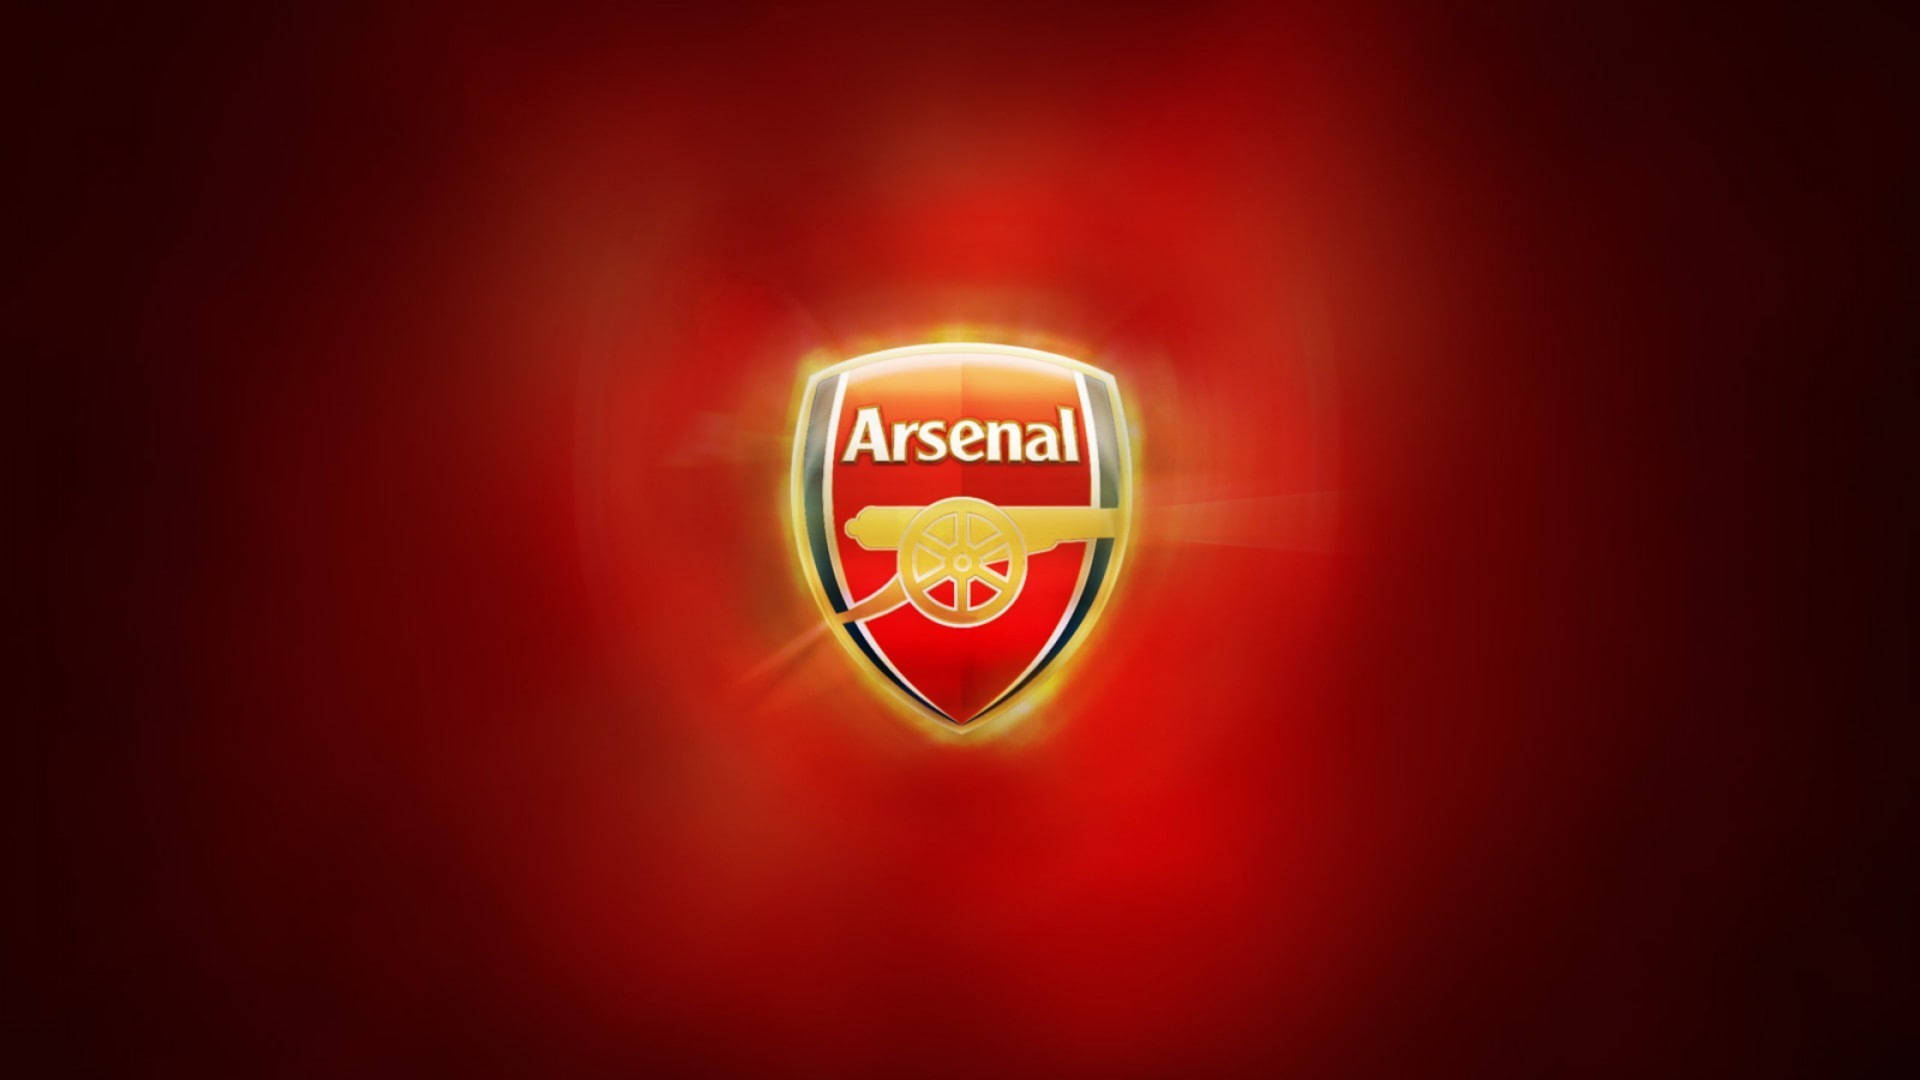 Arsenal In Red Aesthetic